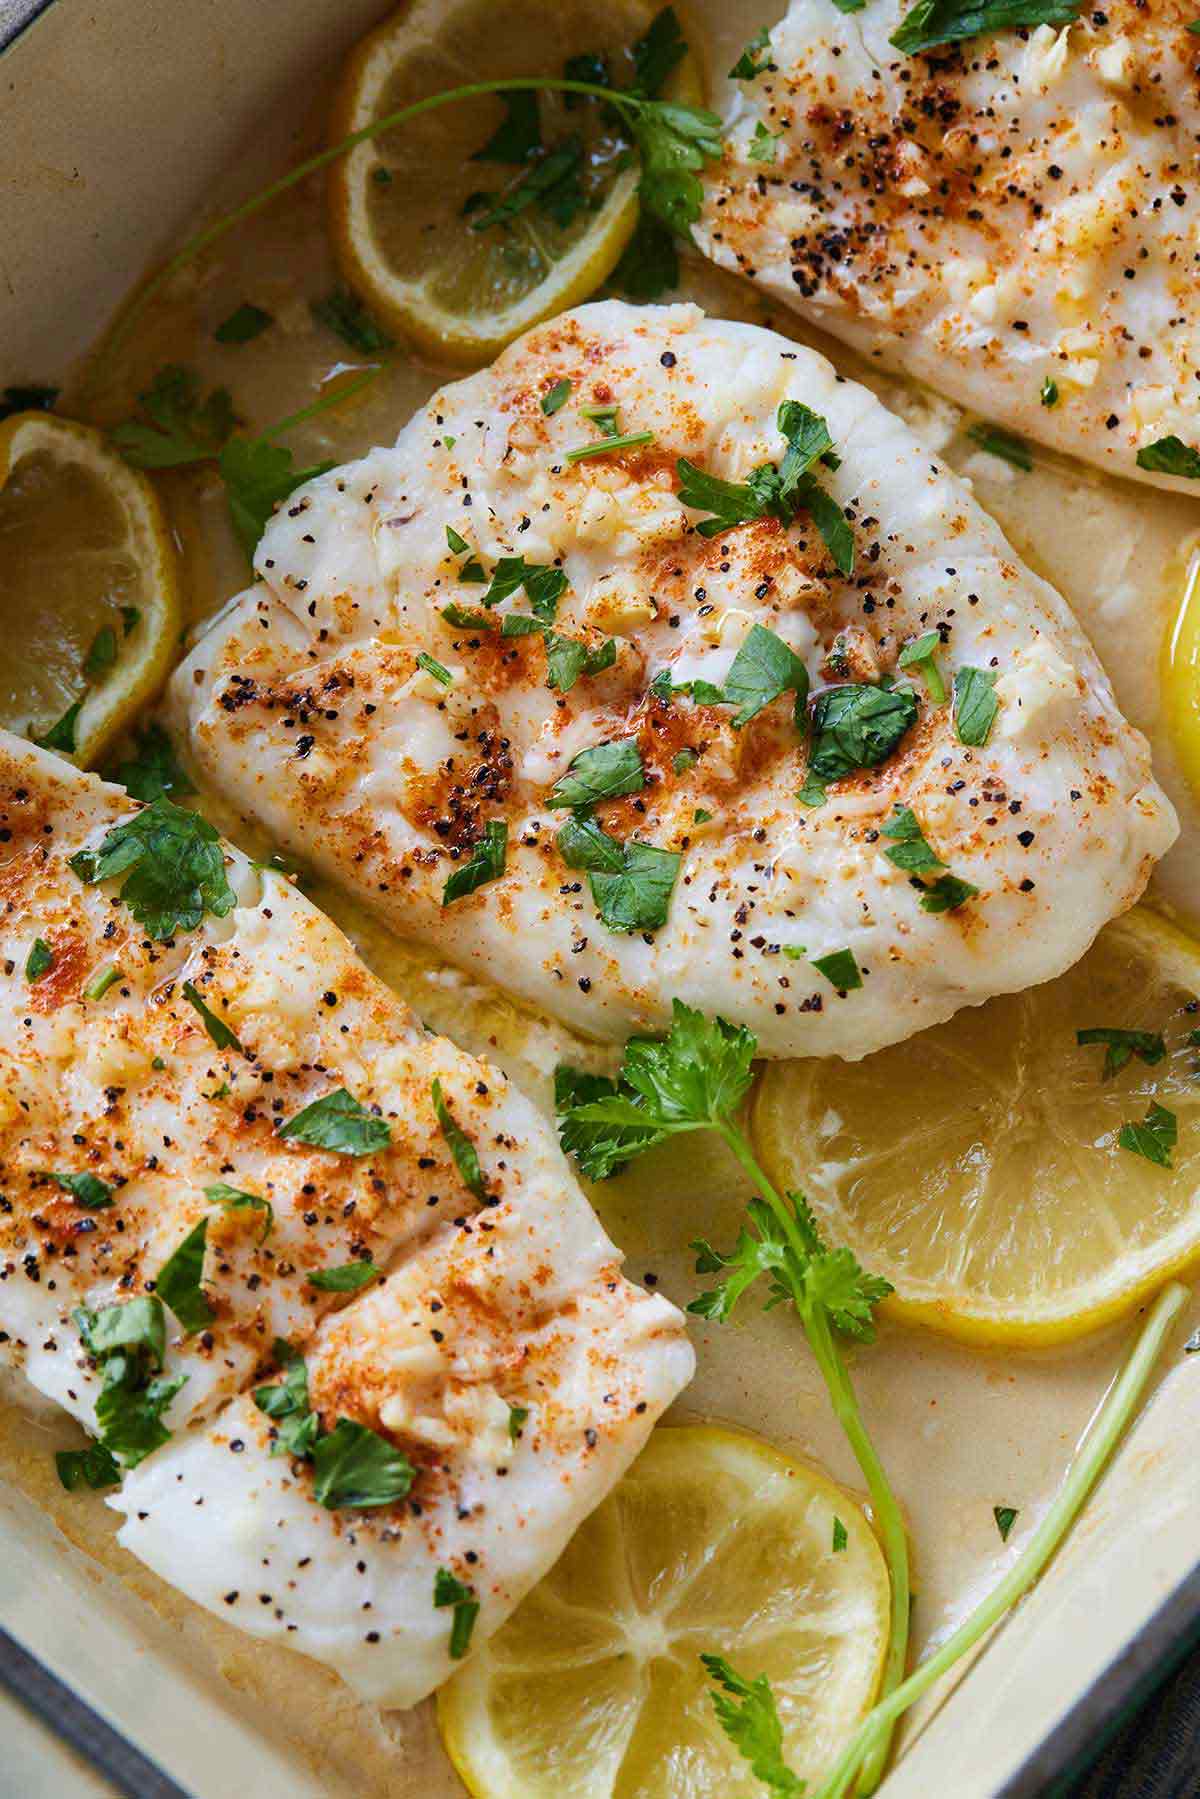 Overhead view of pieces of baked cod in a baking dish with fresh herbs and lemon slices.